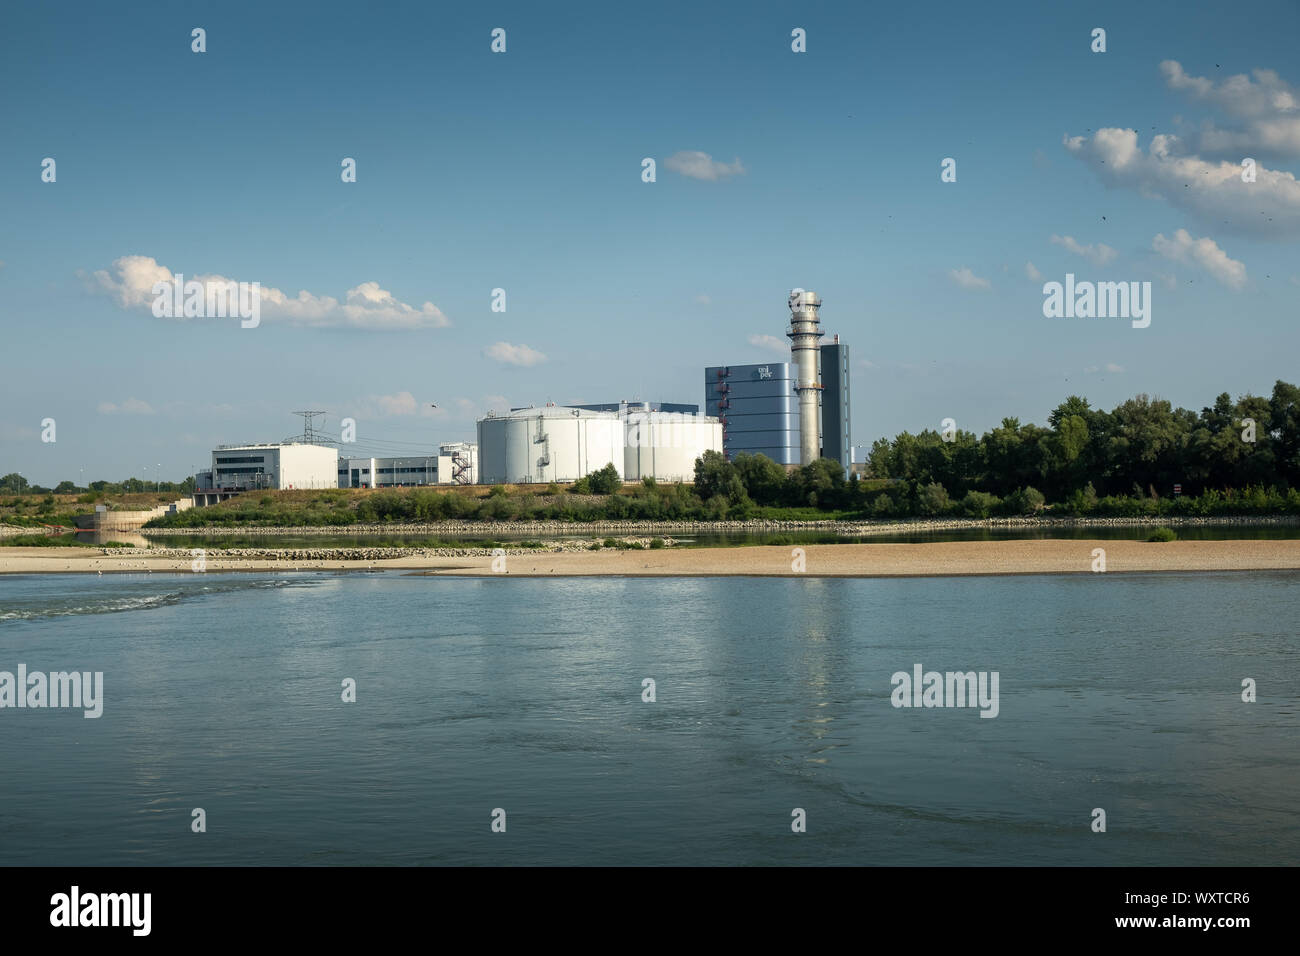 GONYU, HUNGARY - AUGUST 20, 2019: UNIPER factory in Gonyu, a town in the Gyor district on the border with Slovakia marked by the Danube river. Illustr Stock Photo